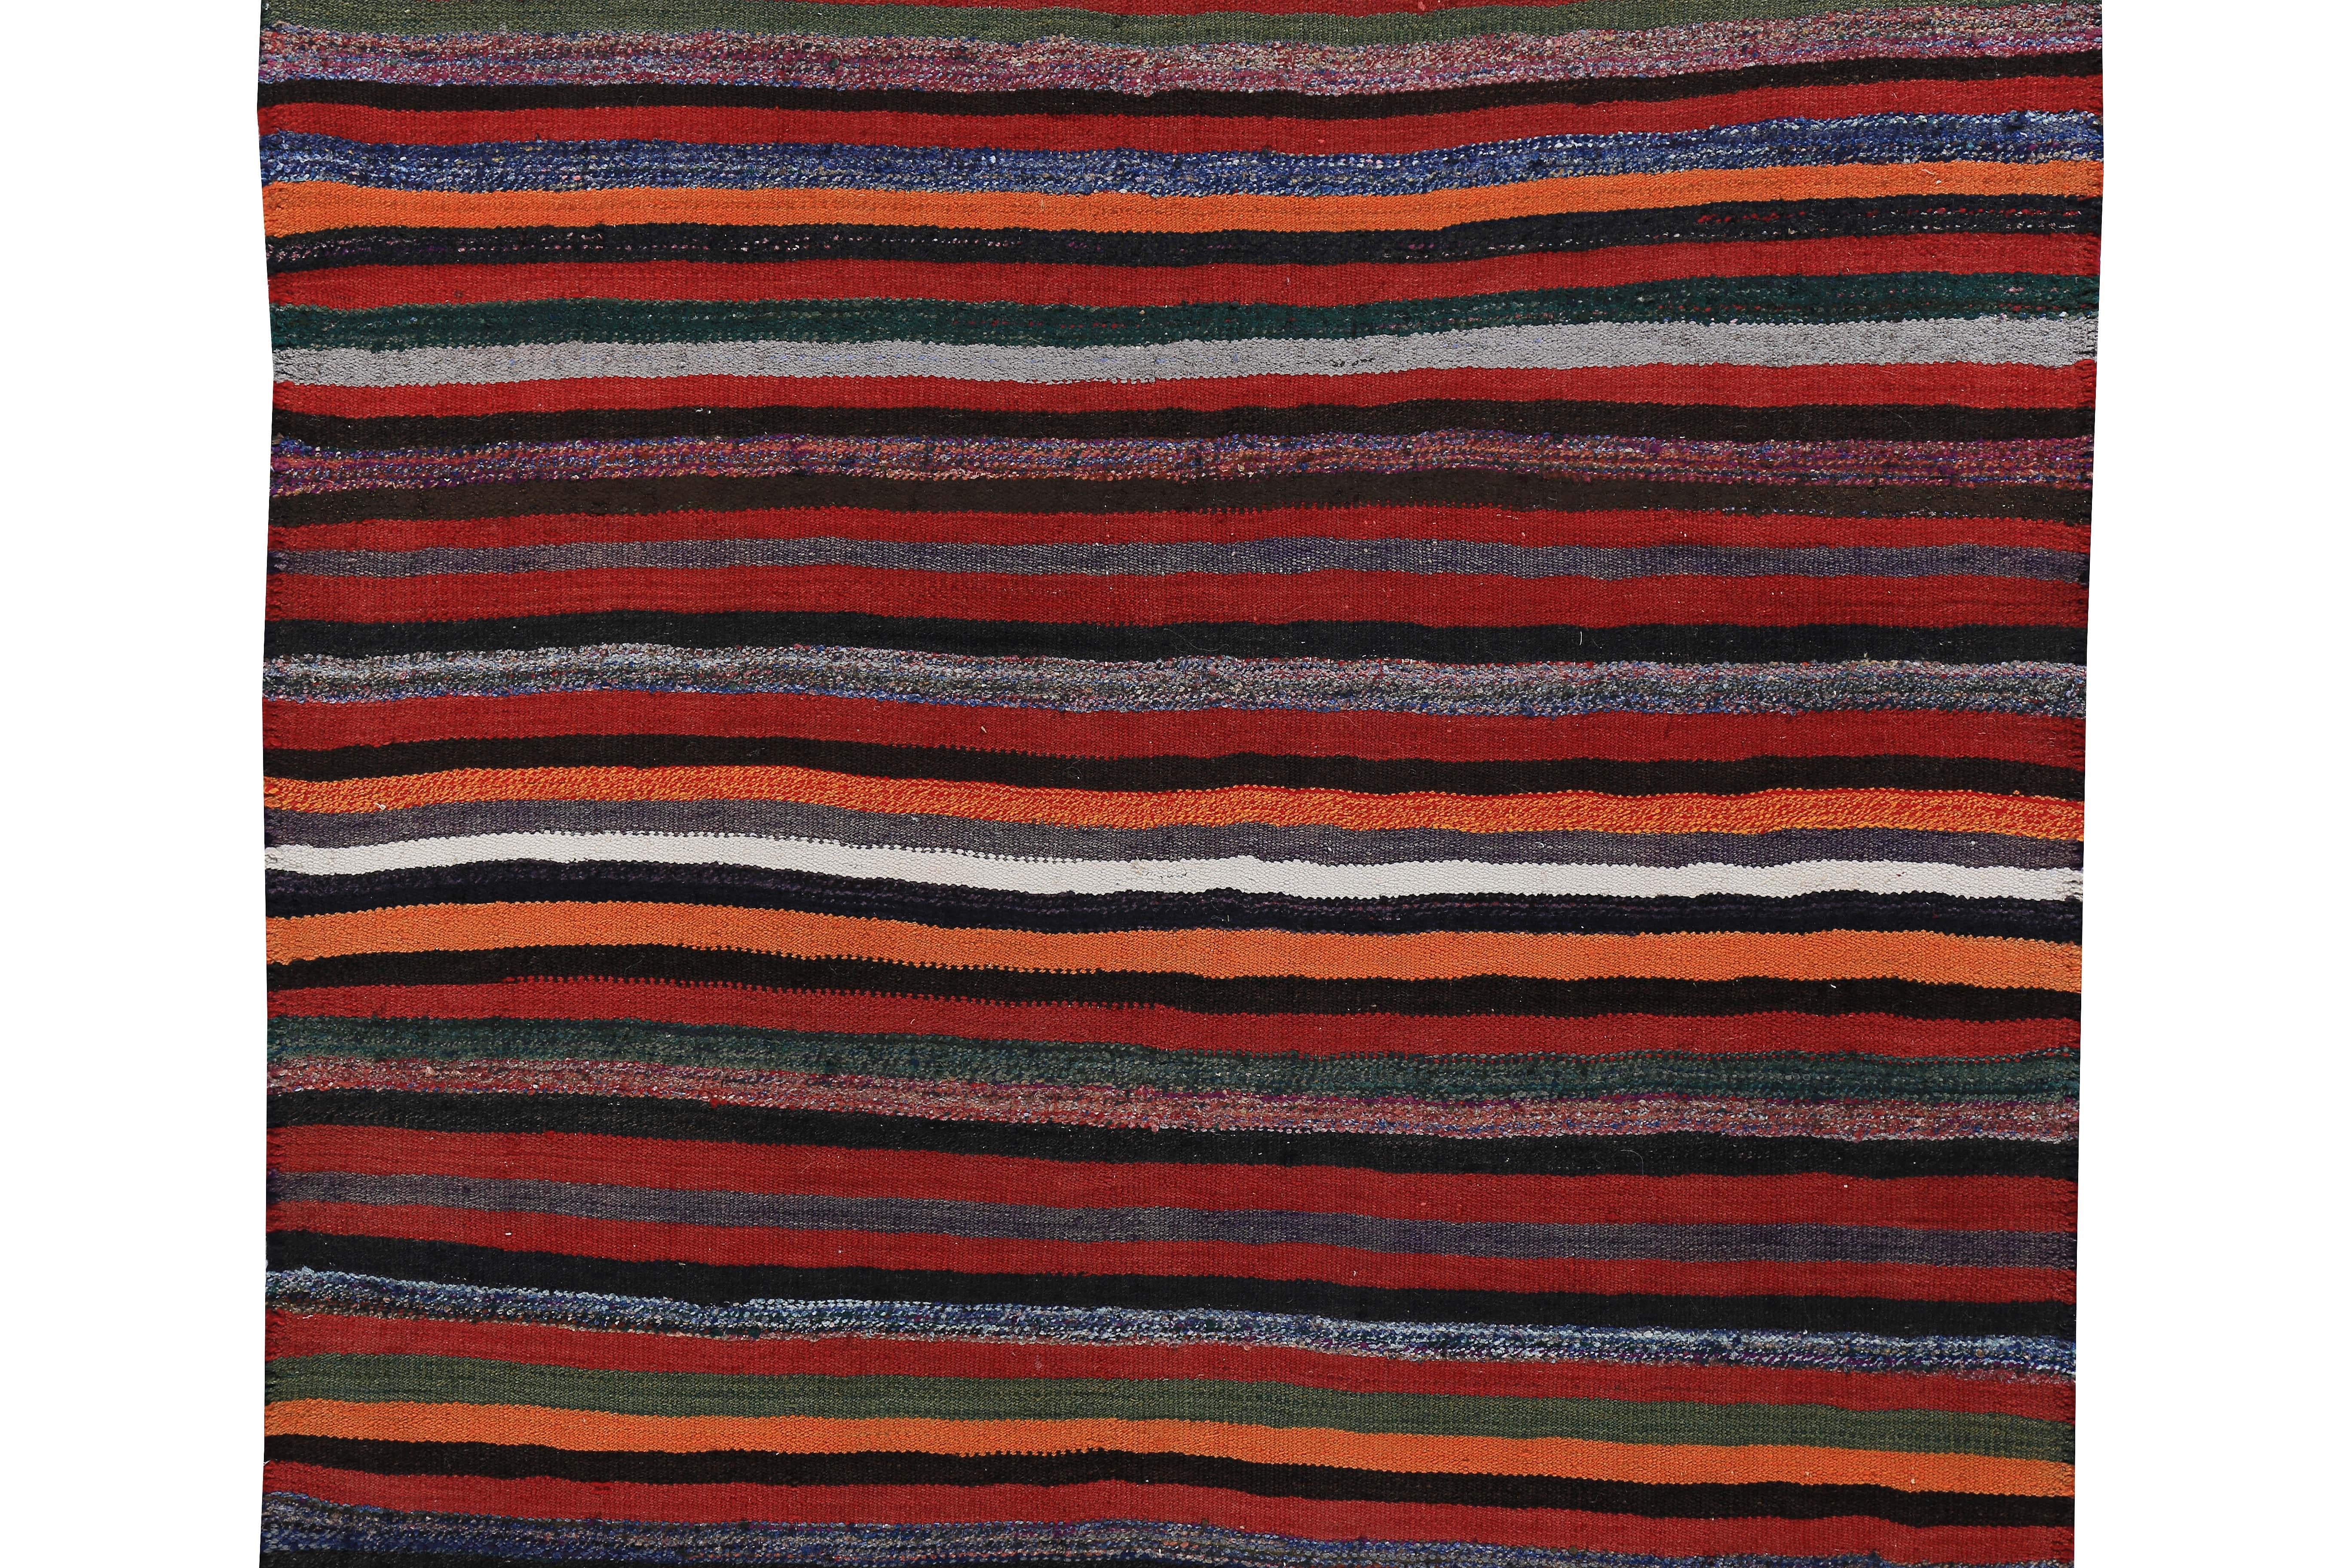 Hand-Woven Turkish Kilim Rug with Multicolored Tribal Stripes For Sale